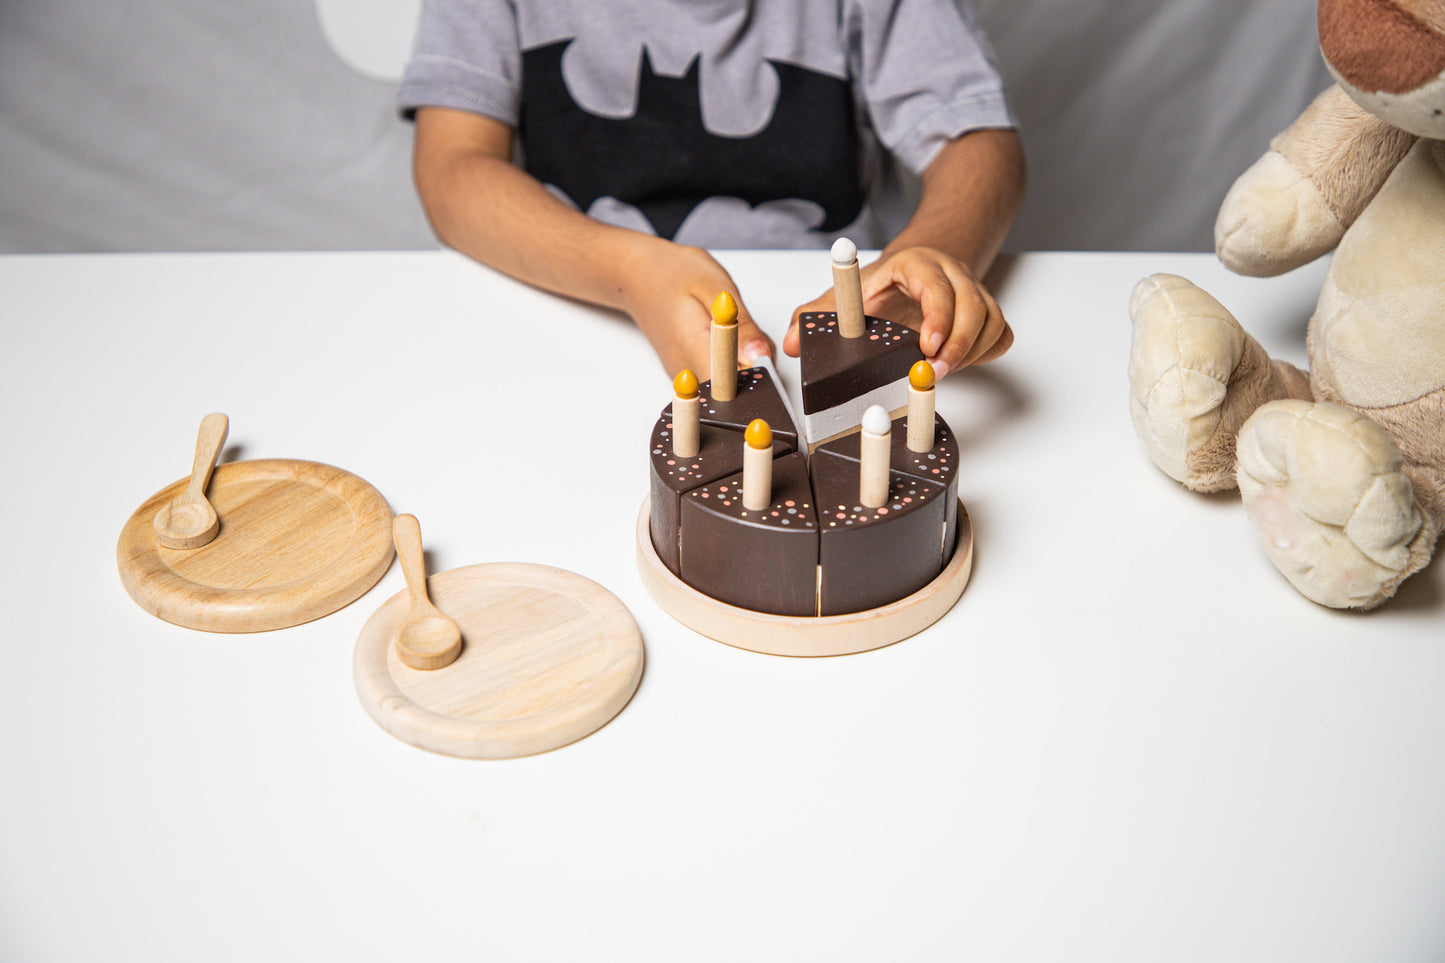 Birch Party Cake PlaySet - 18 pieces